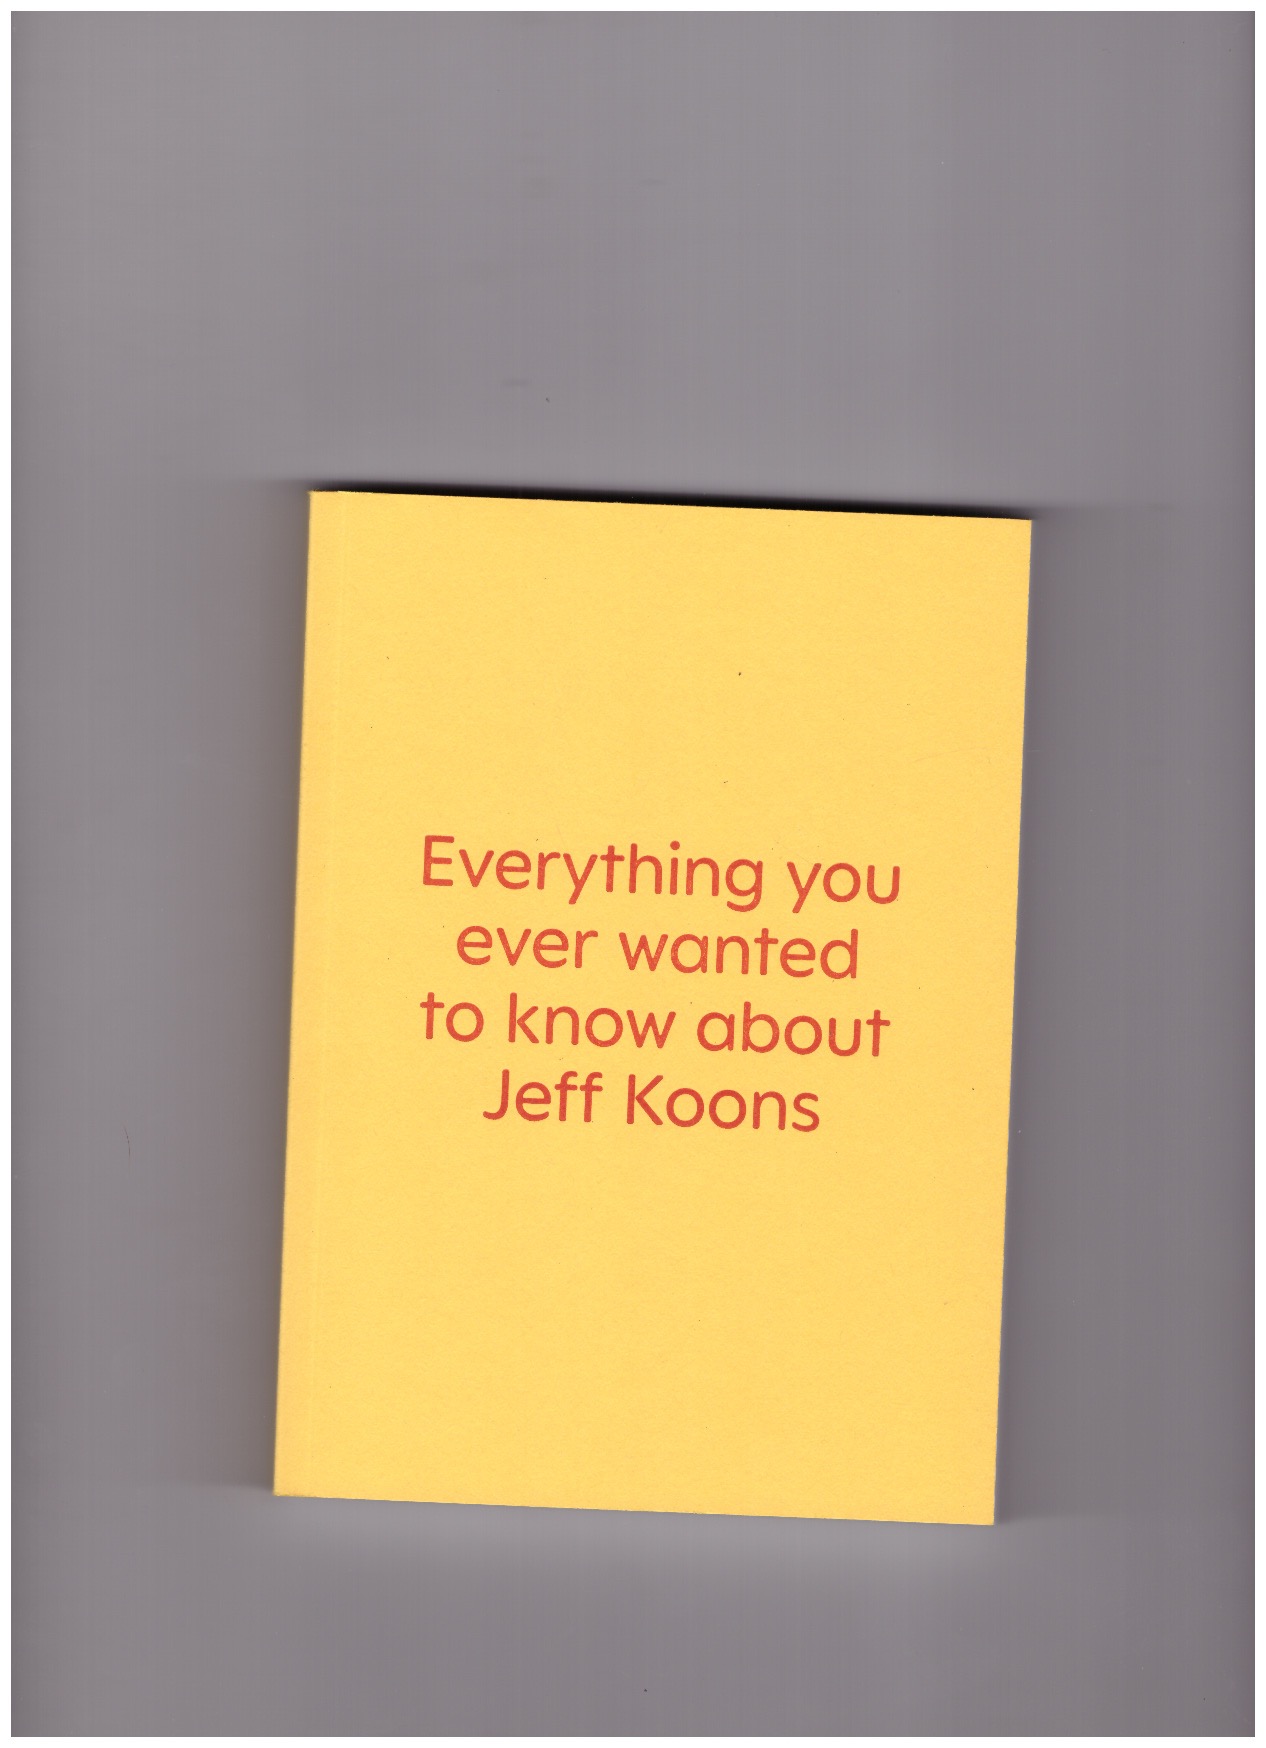 BOVET, Roxane; MUDRY, Yoan; AOUNALLAH, Mondher - Everything you ever wanted to know about Jeff Koons. Just kidding. It’s a book of interviews with nine really great artists.